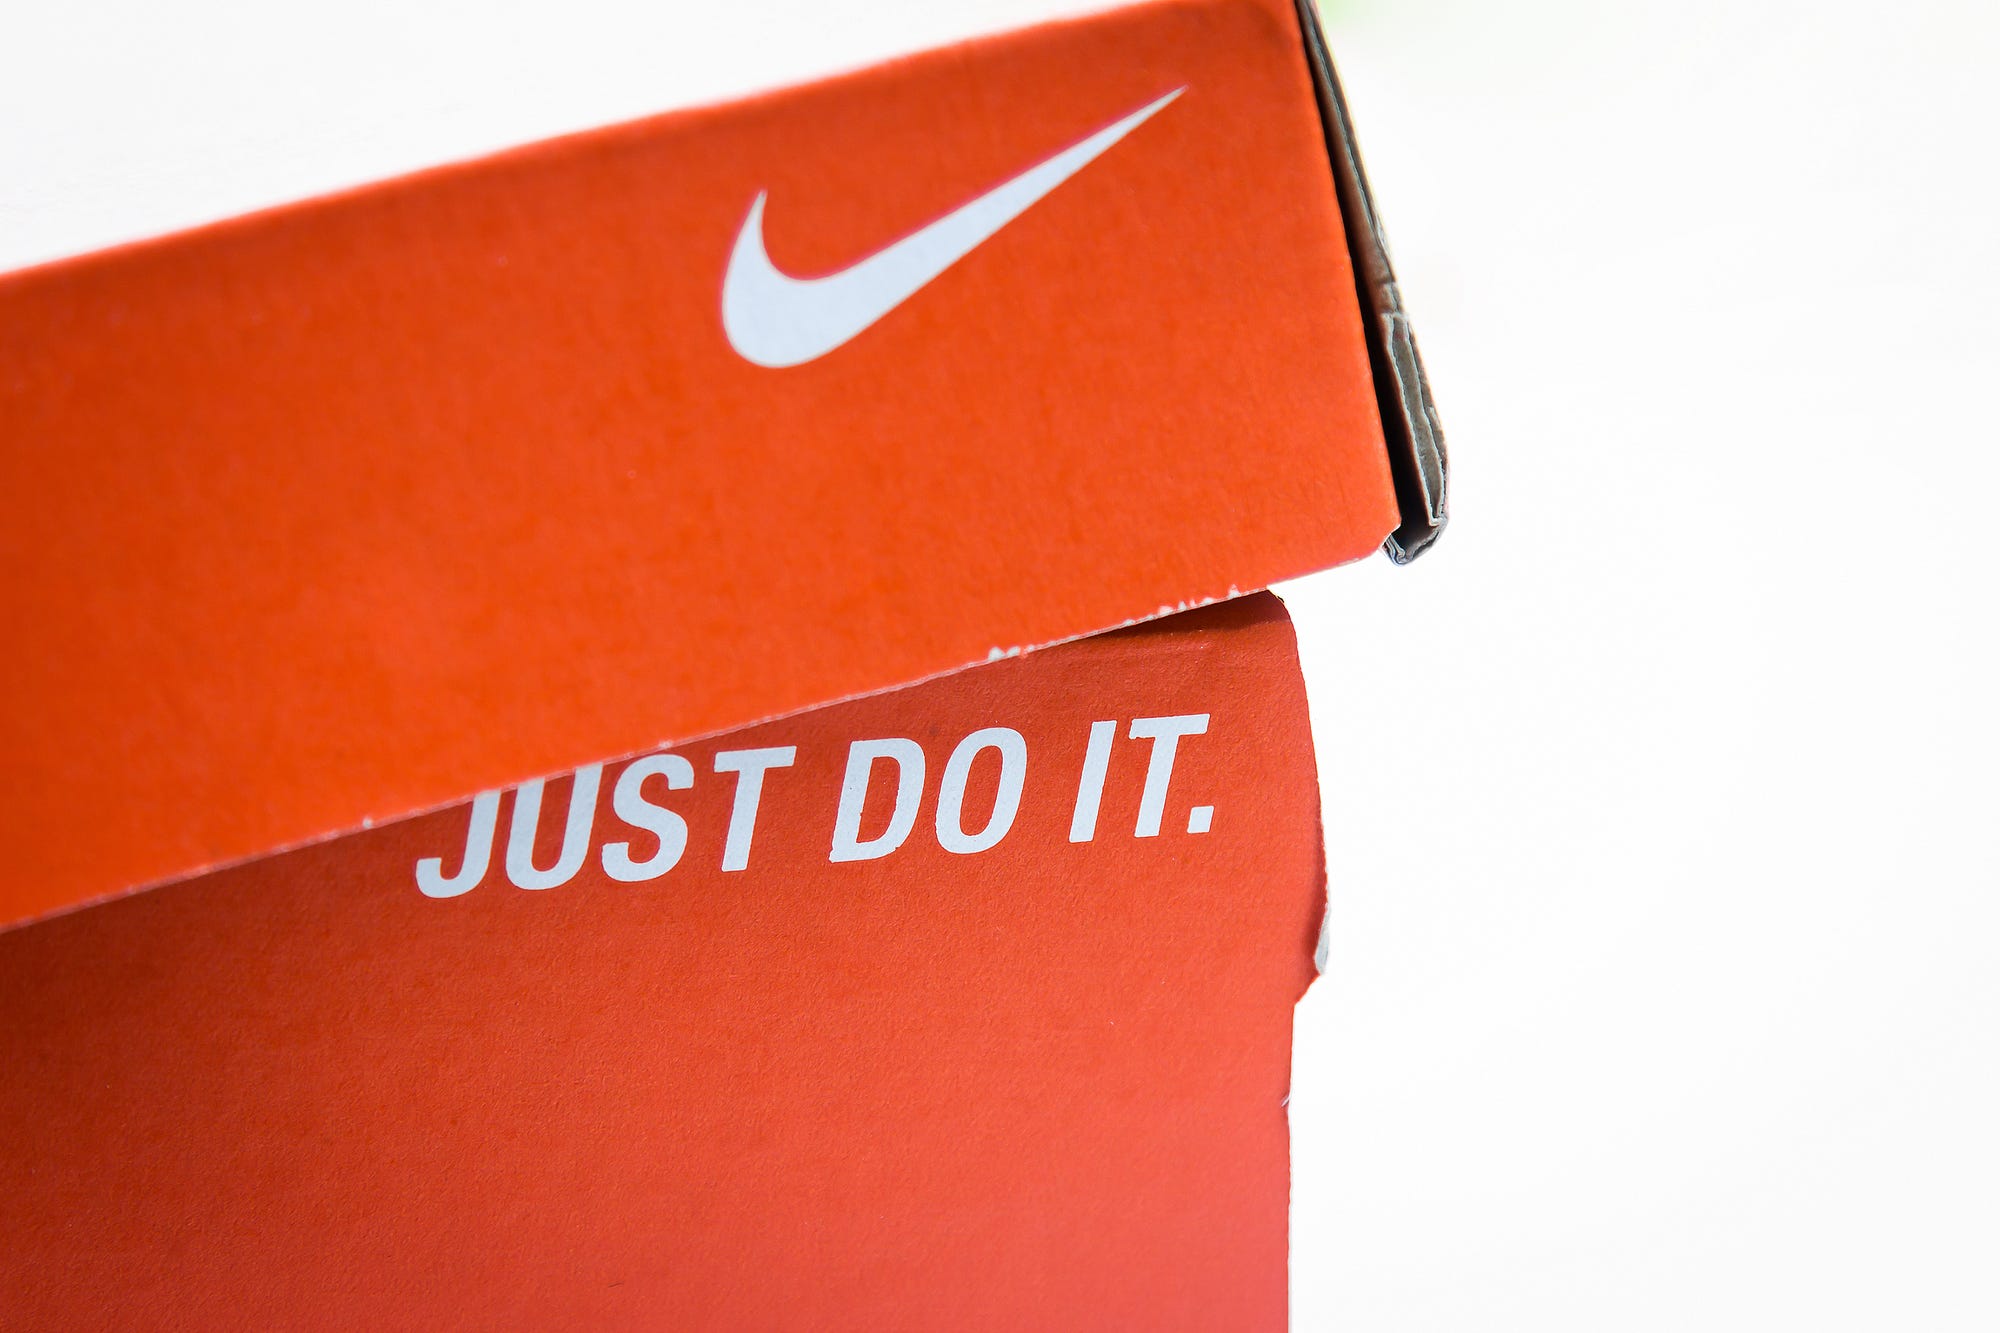 Just Do It. “Just do it.” The Nike slogan was…